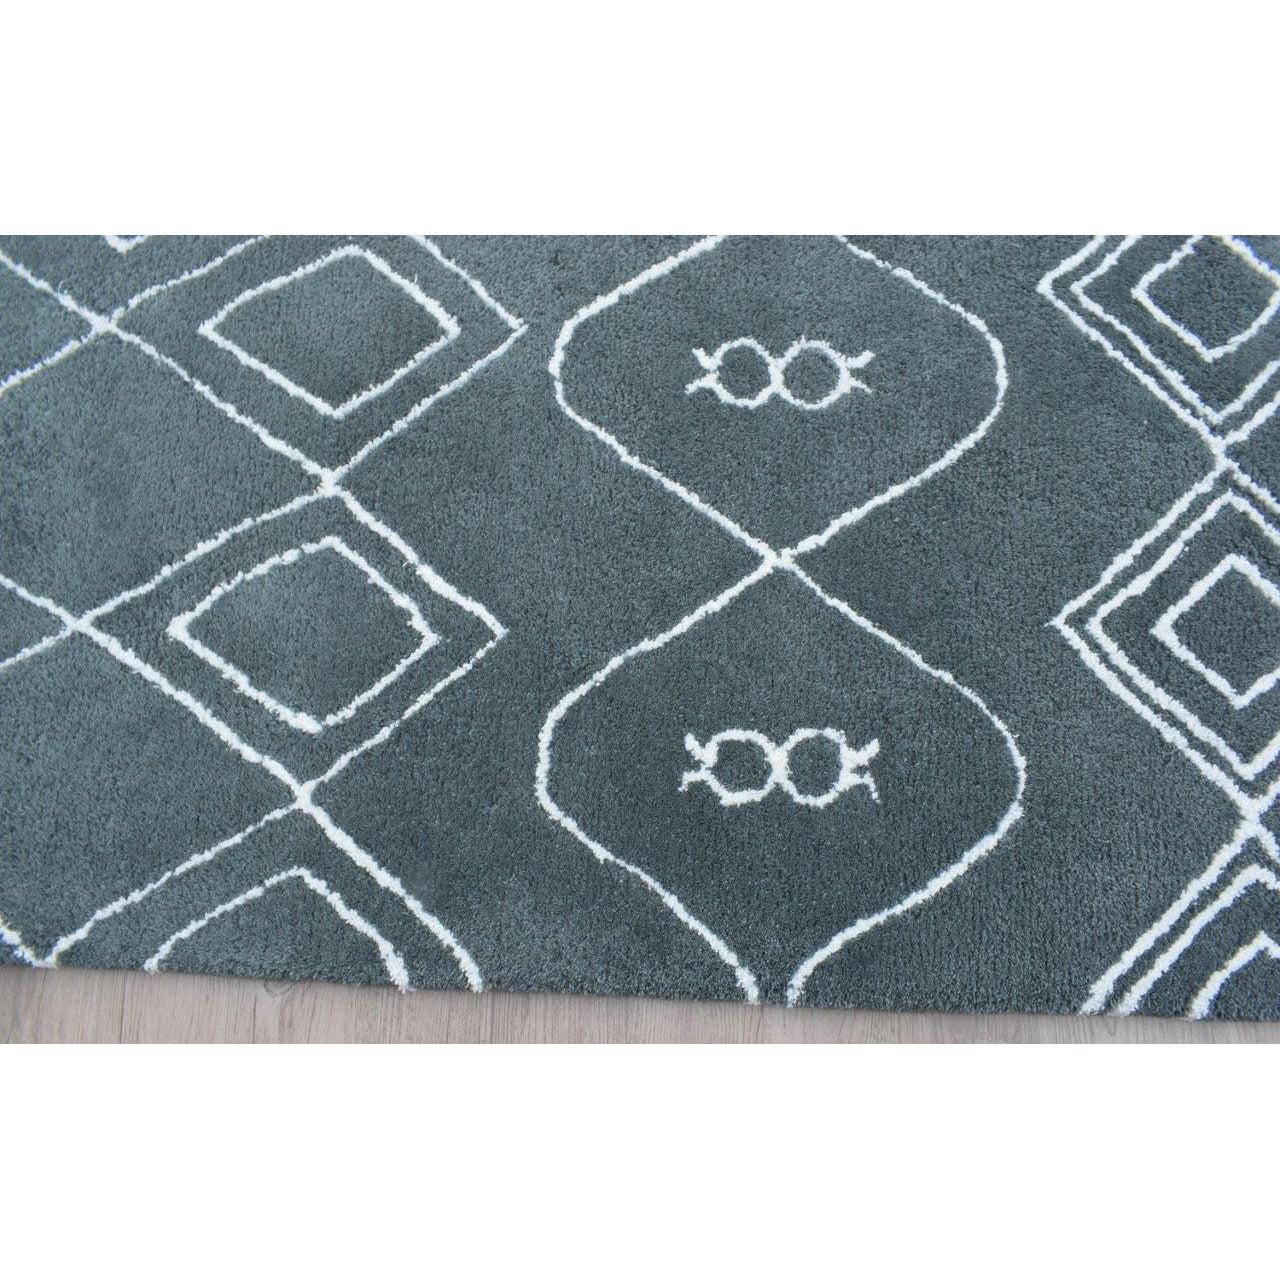 Rugs by Roo | Organic Weave Moroccan Rebel Fantasy Shag Charcoal Area Rug-OW-REBFAN-0508